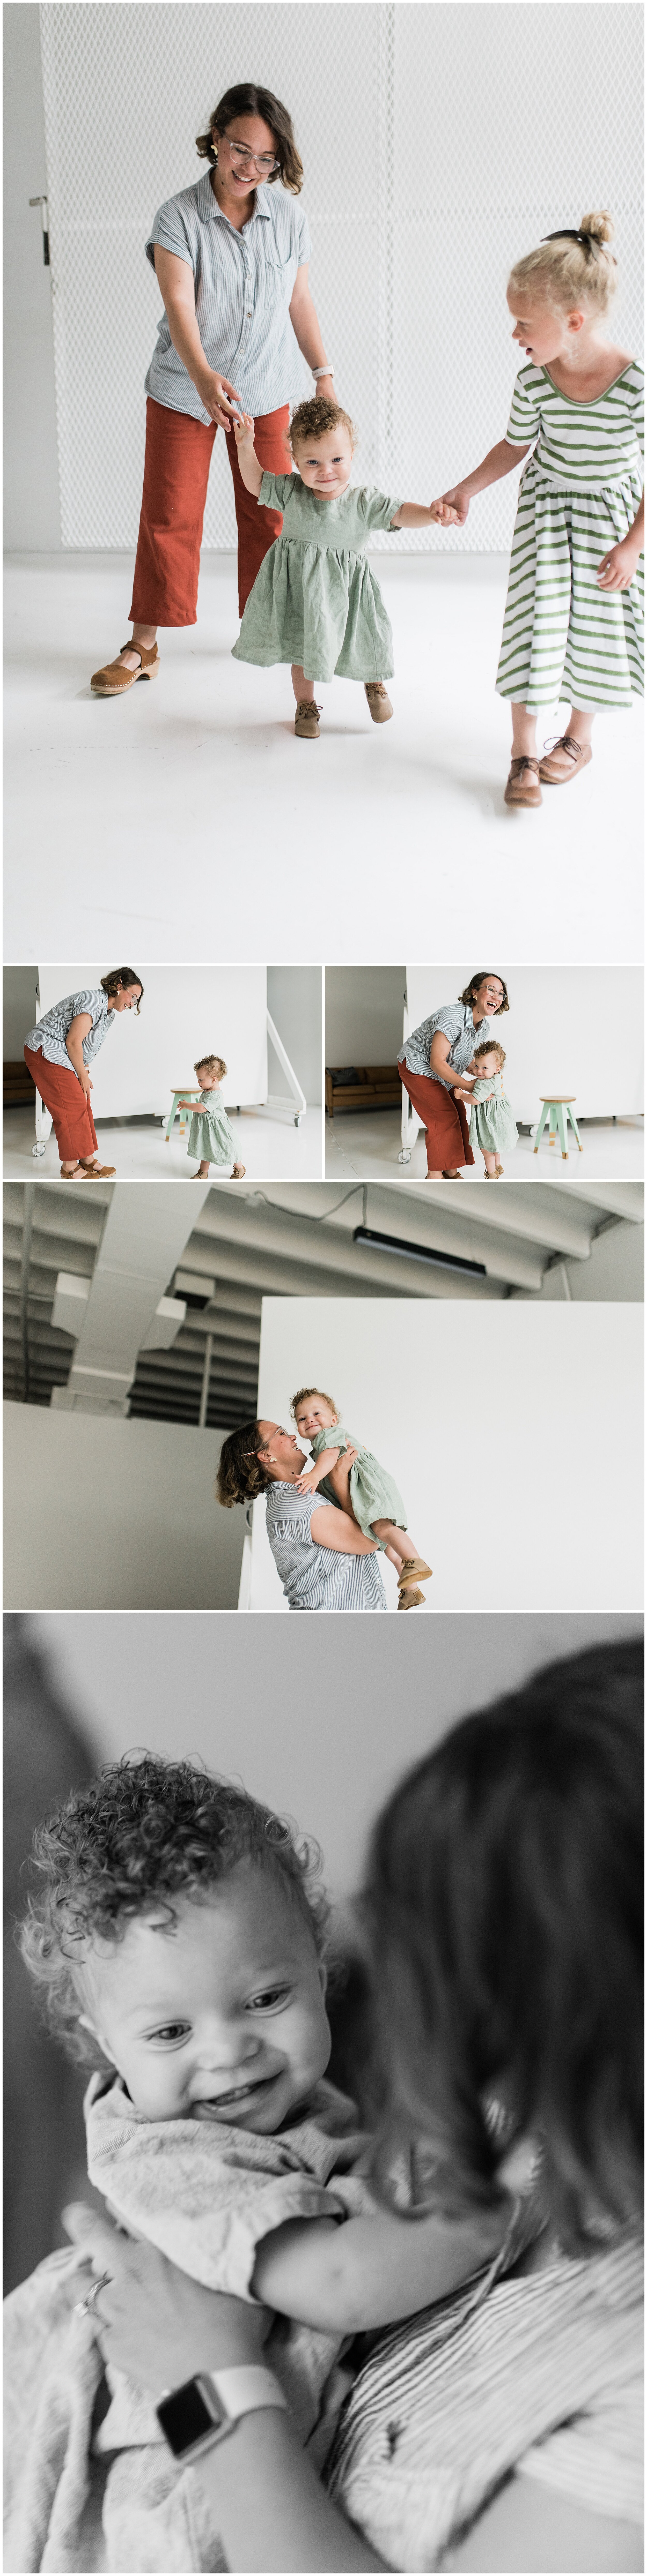  The Darkroom Fort Worth, Family session | Fort Worth Family Photographer | www.jordanmitchellphotography.com 